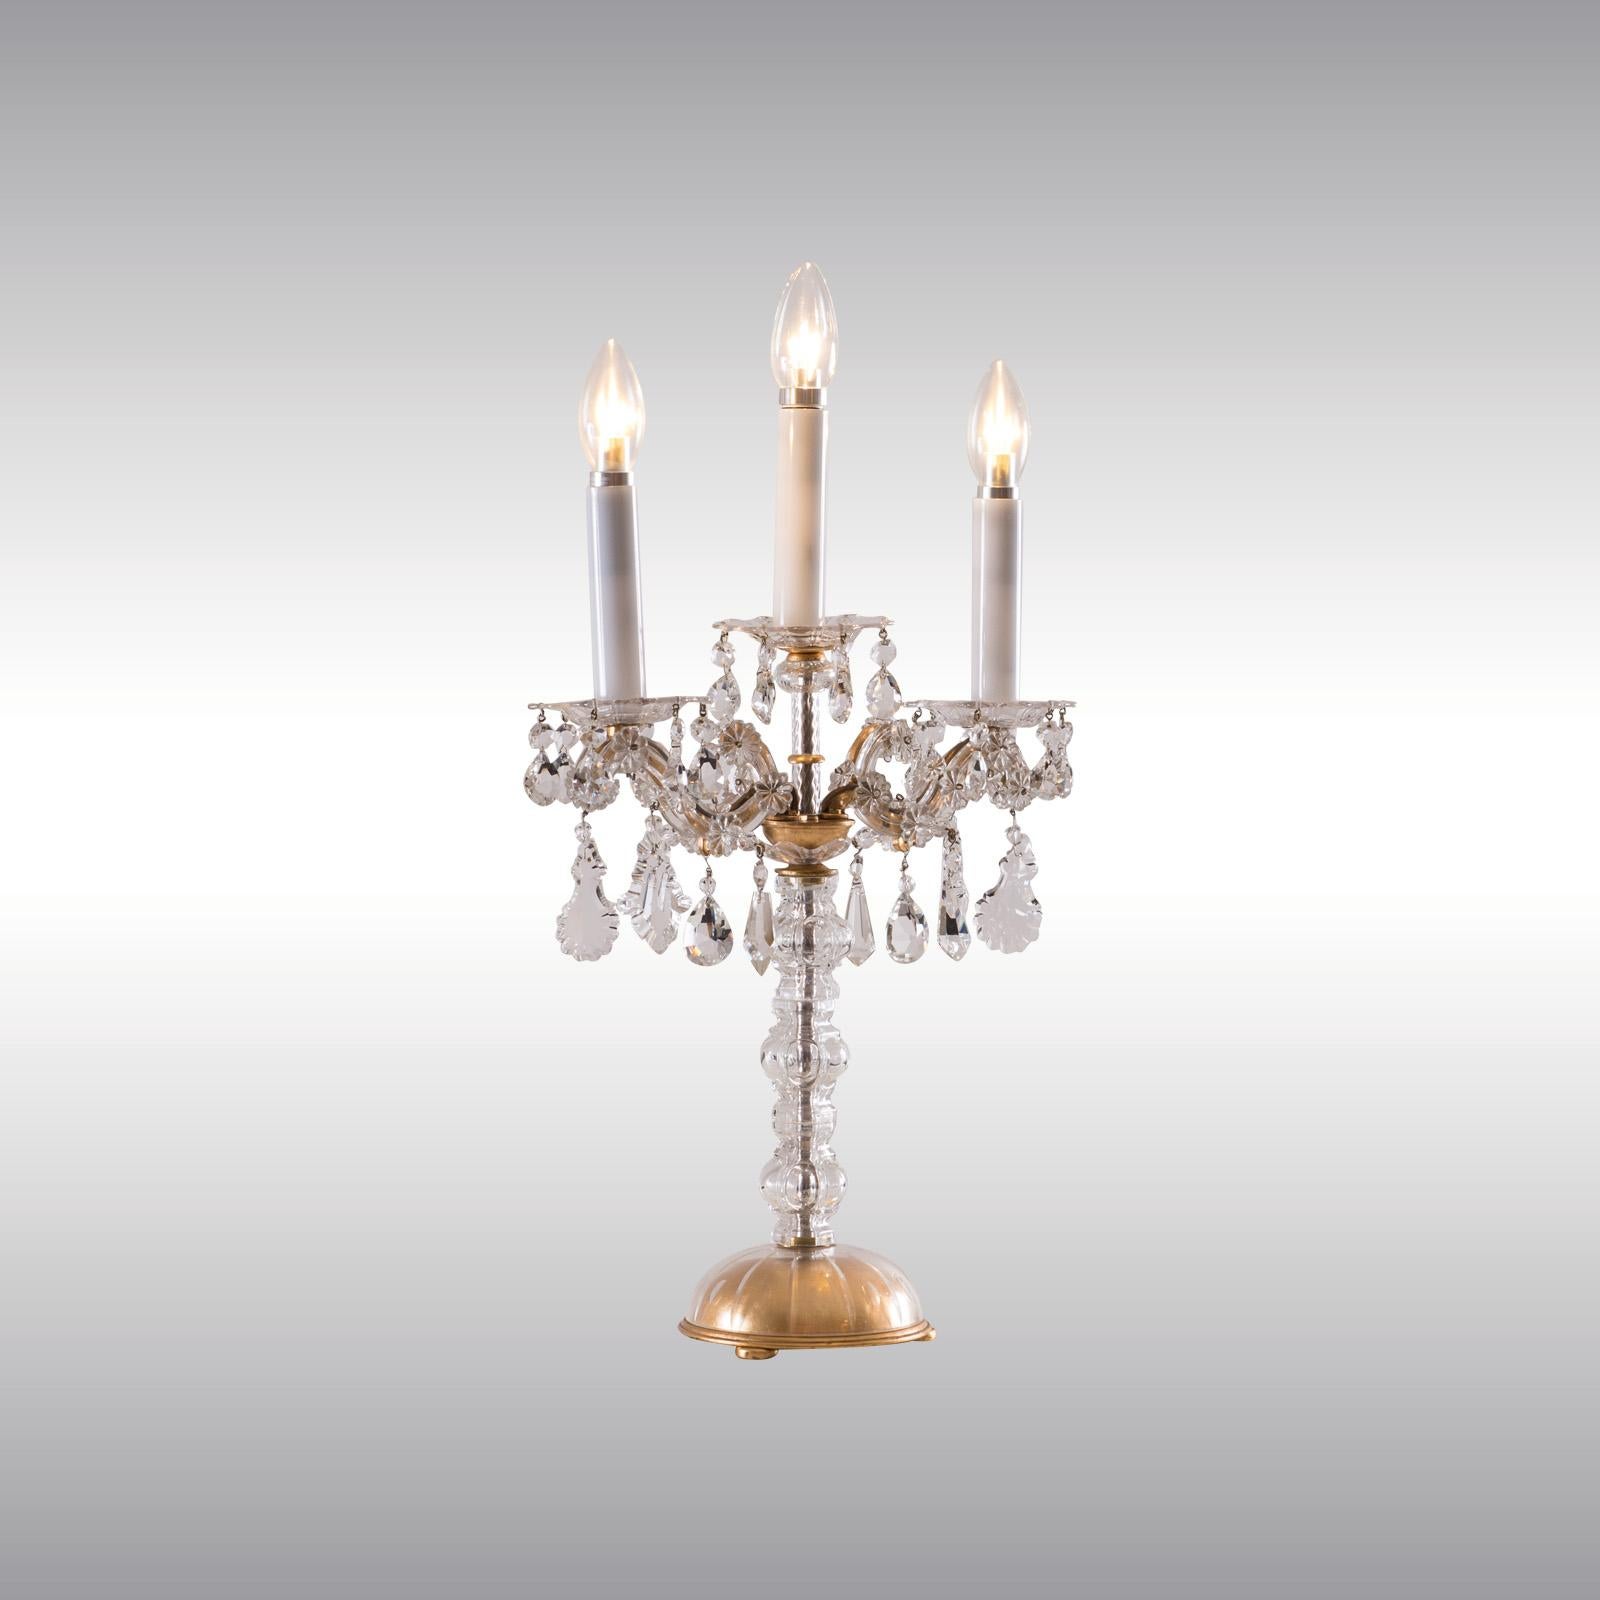 Baroque Revival  Baroque style Maria Theresia Table Light Candelabra 20th Century Original 1920  For Sale